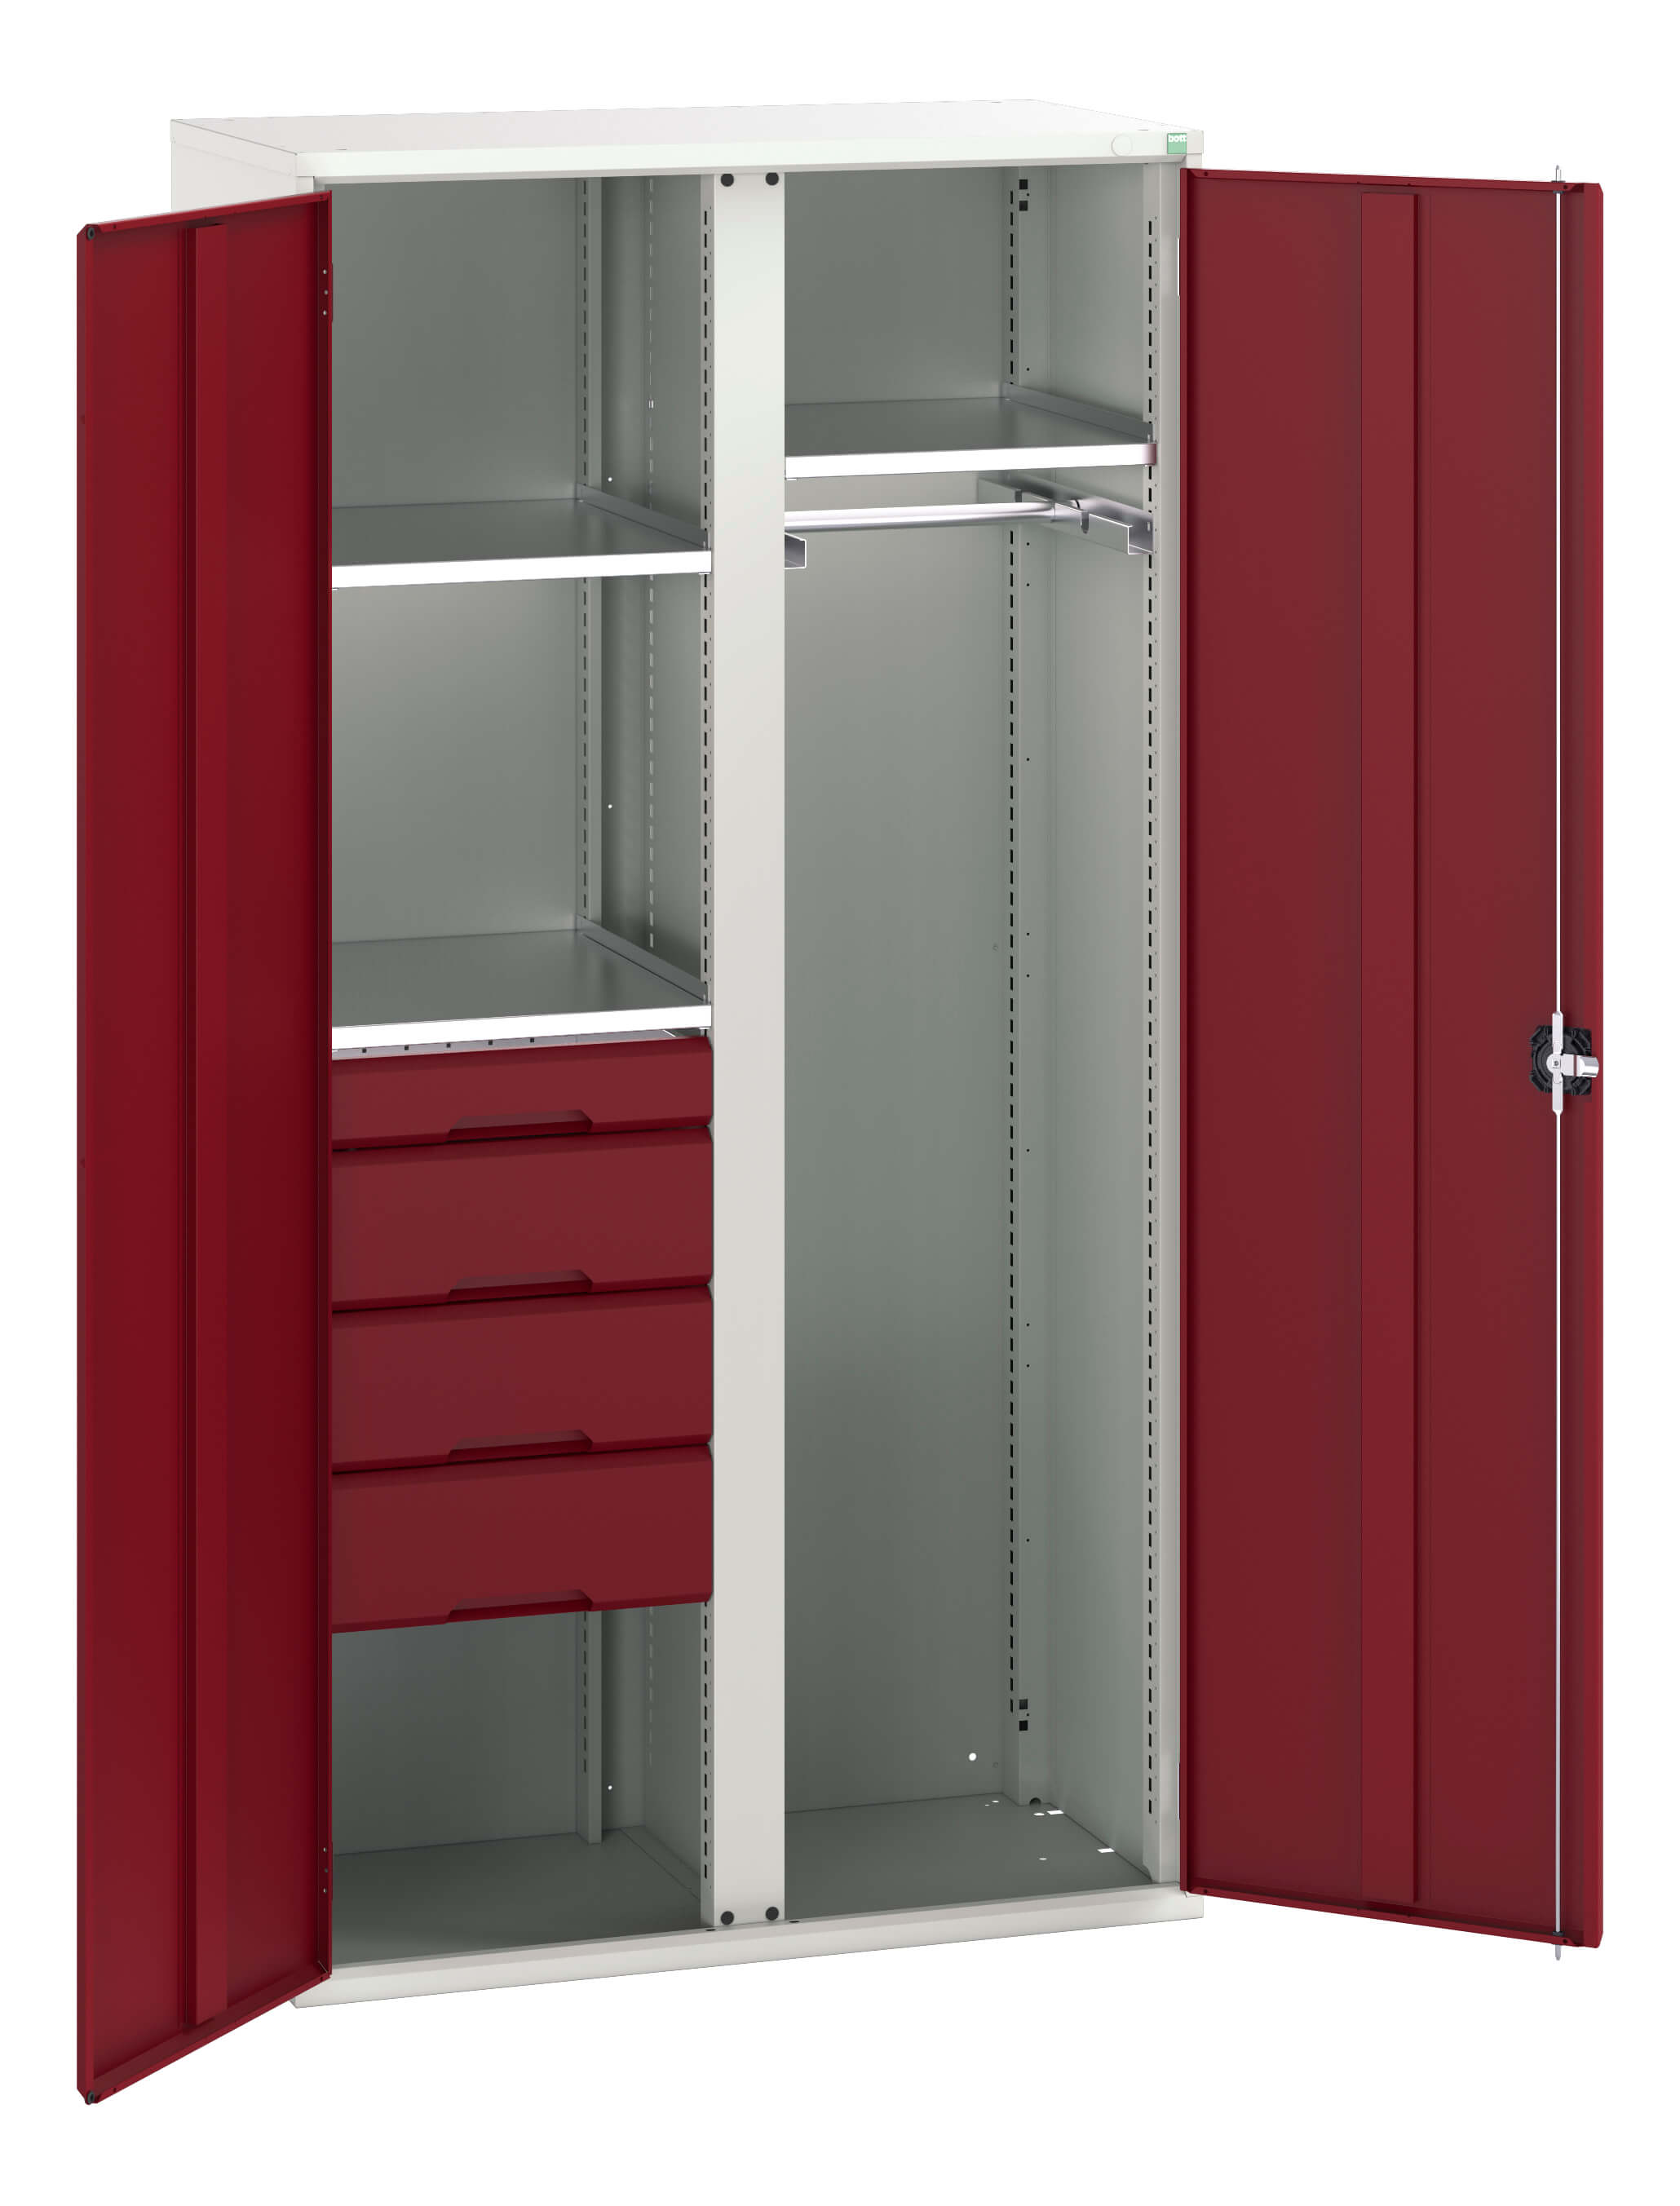 Bott Verso Ppe / Janitorial Kitted Cupboard With Vertical Partition - 16926581.24